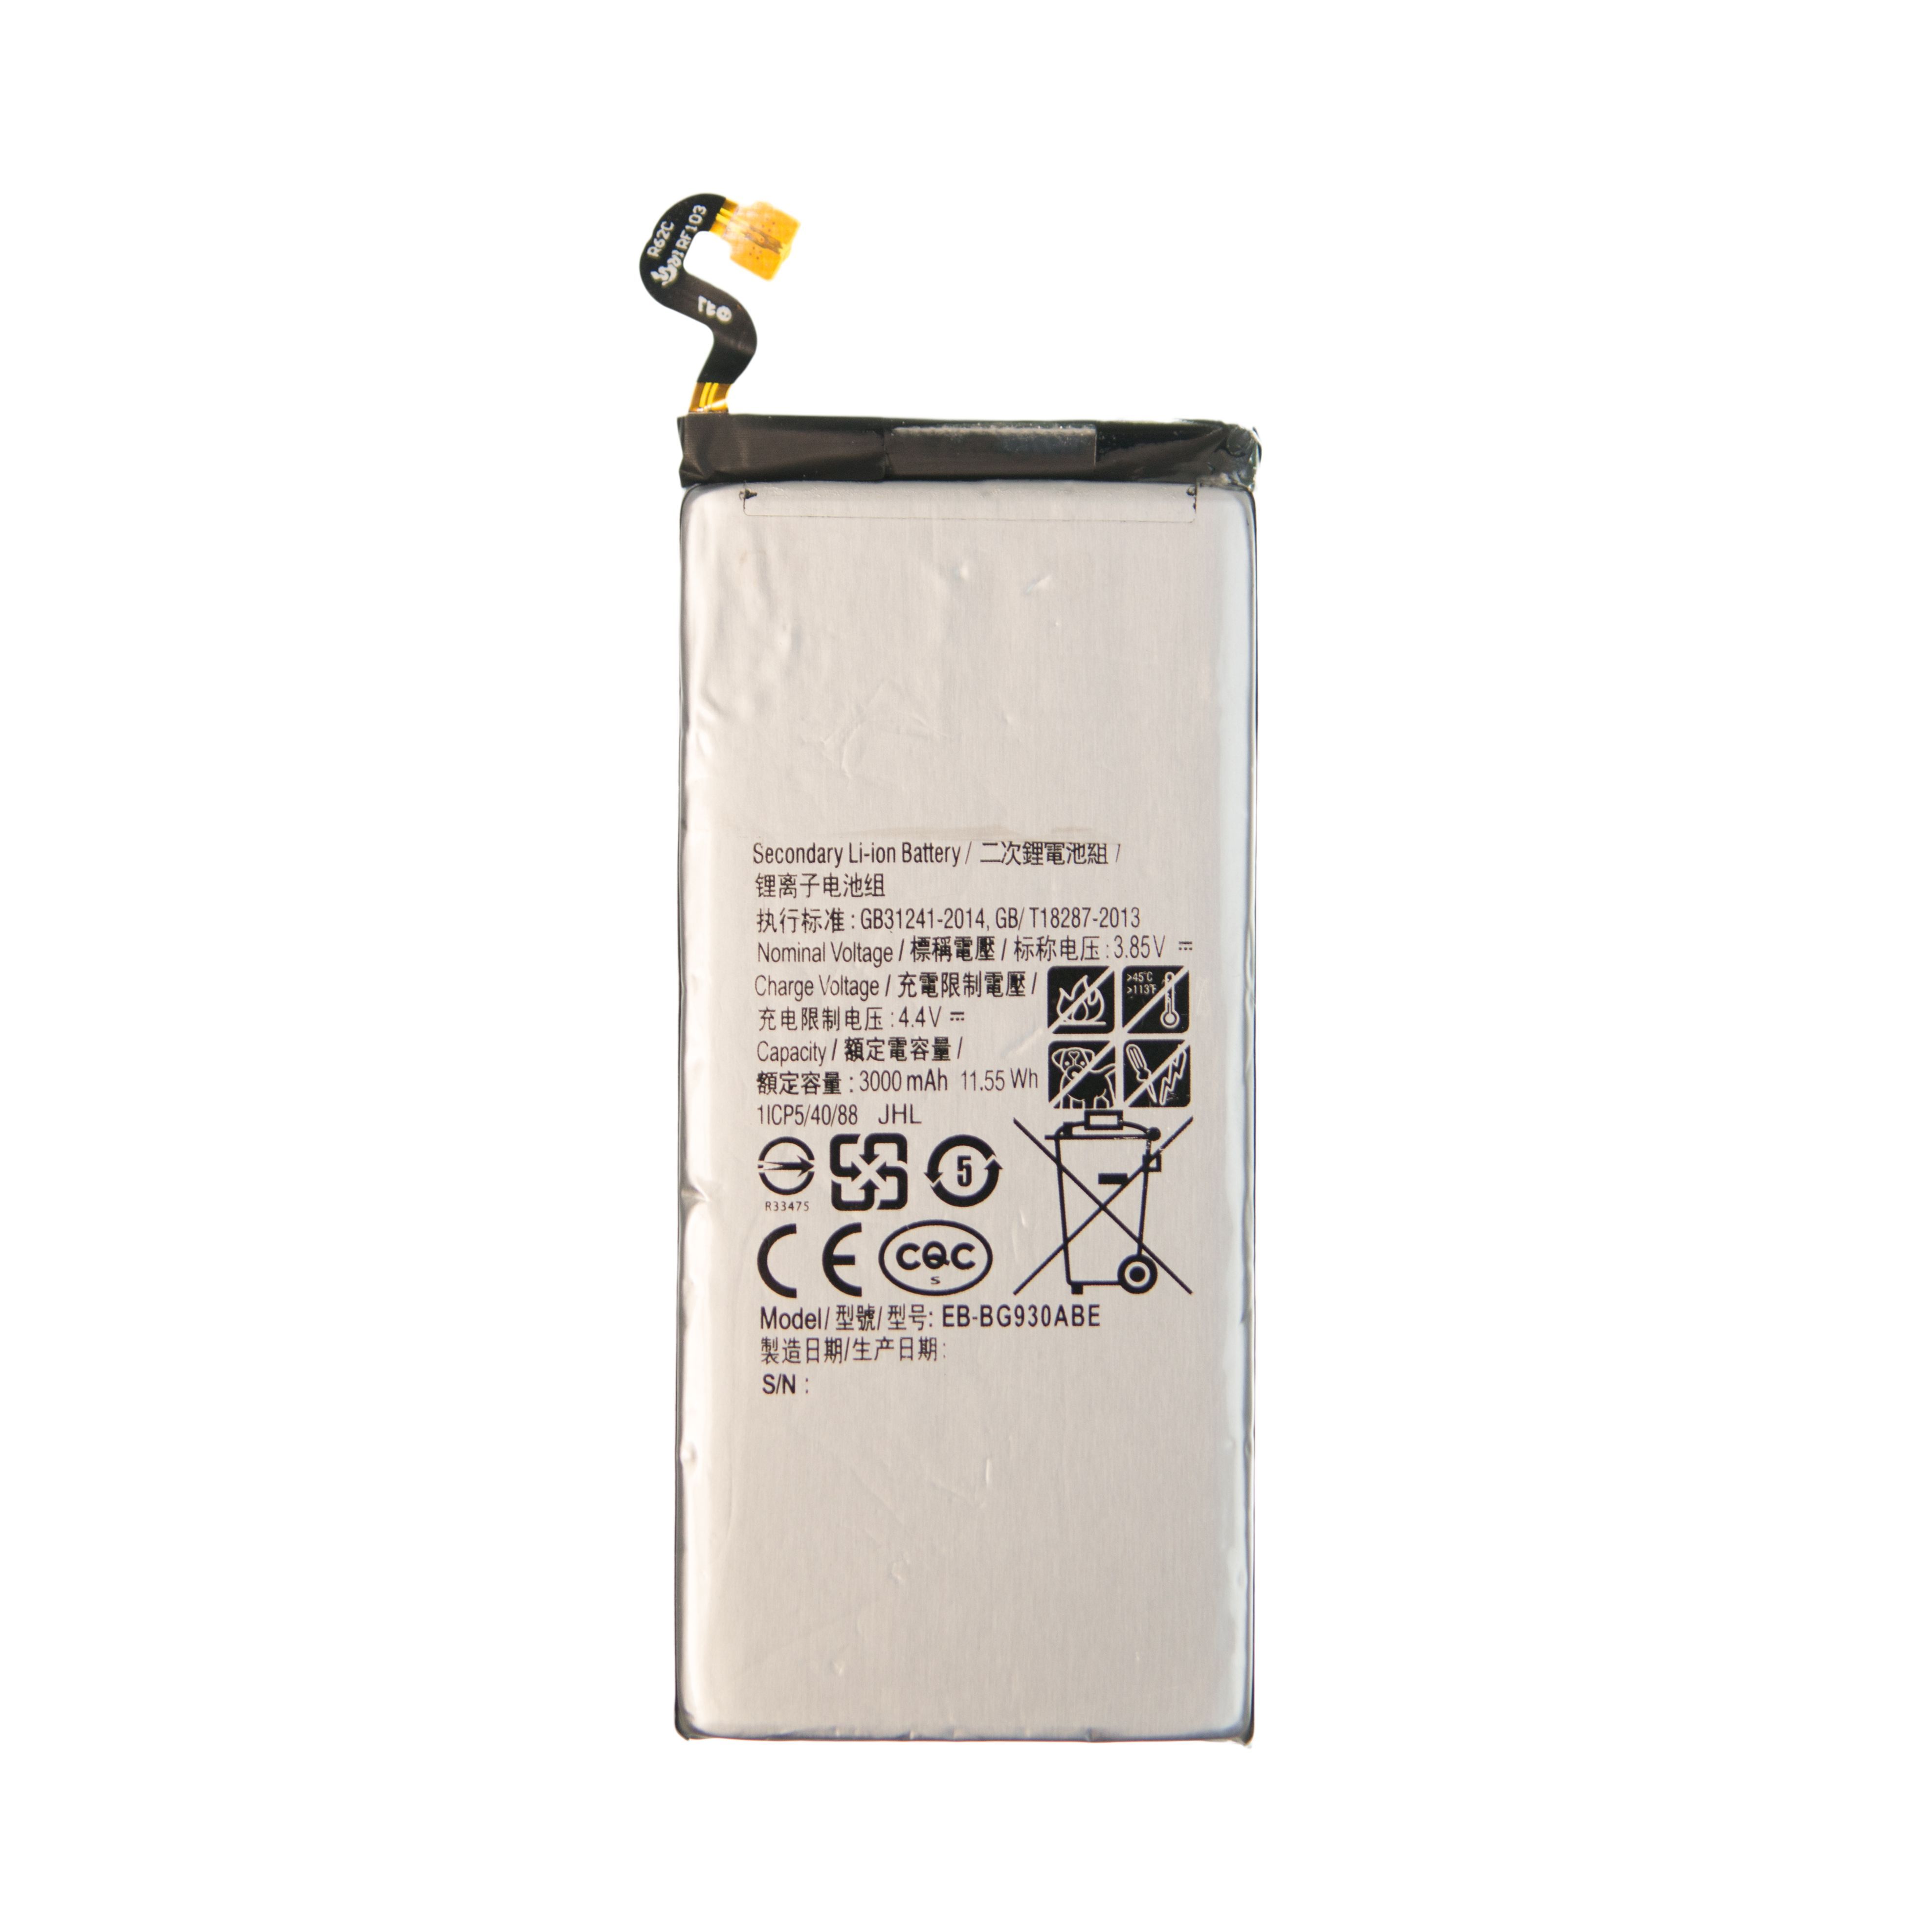 where to replace samsung s7 battery